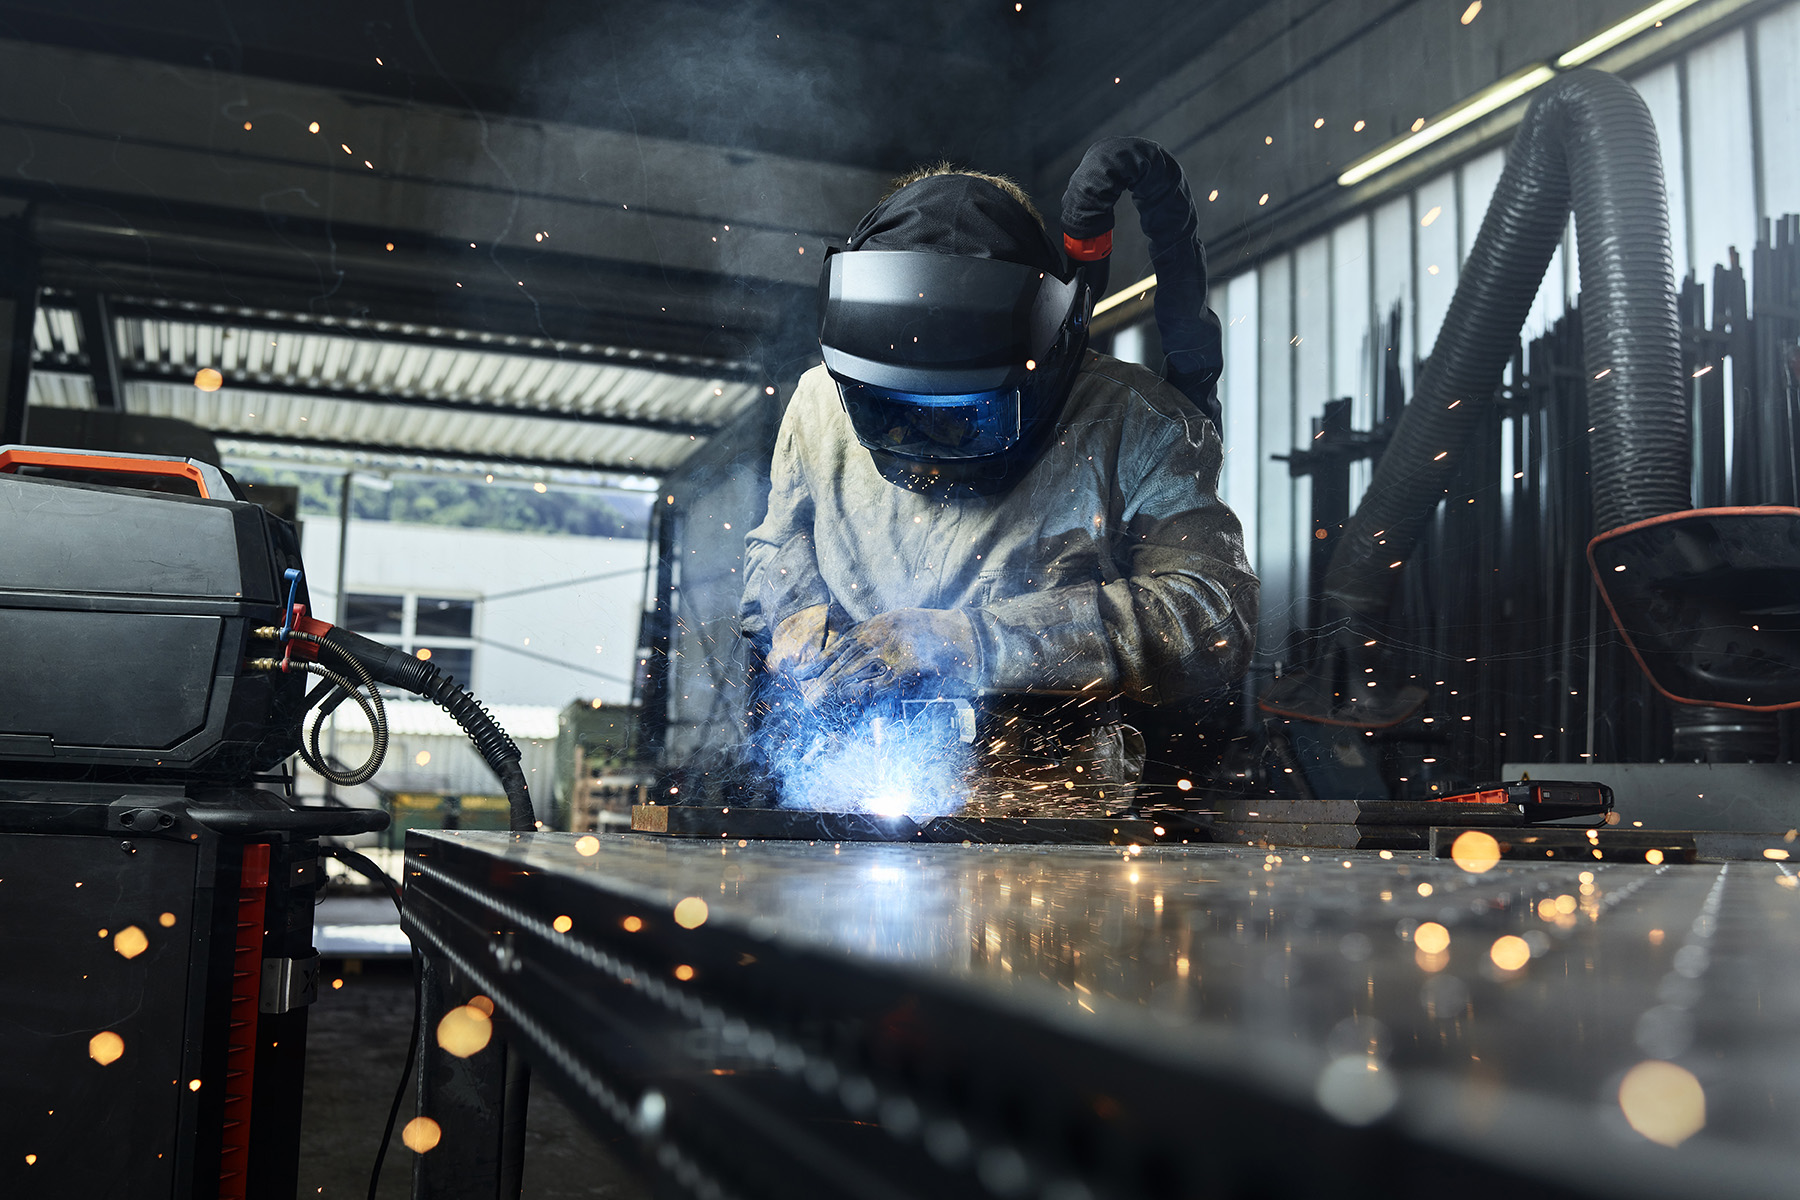 A metal worker wearing protective gear welds something